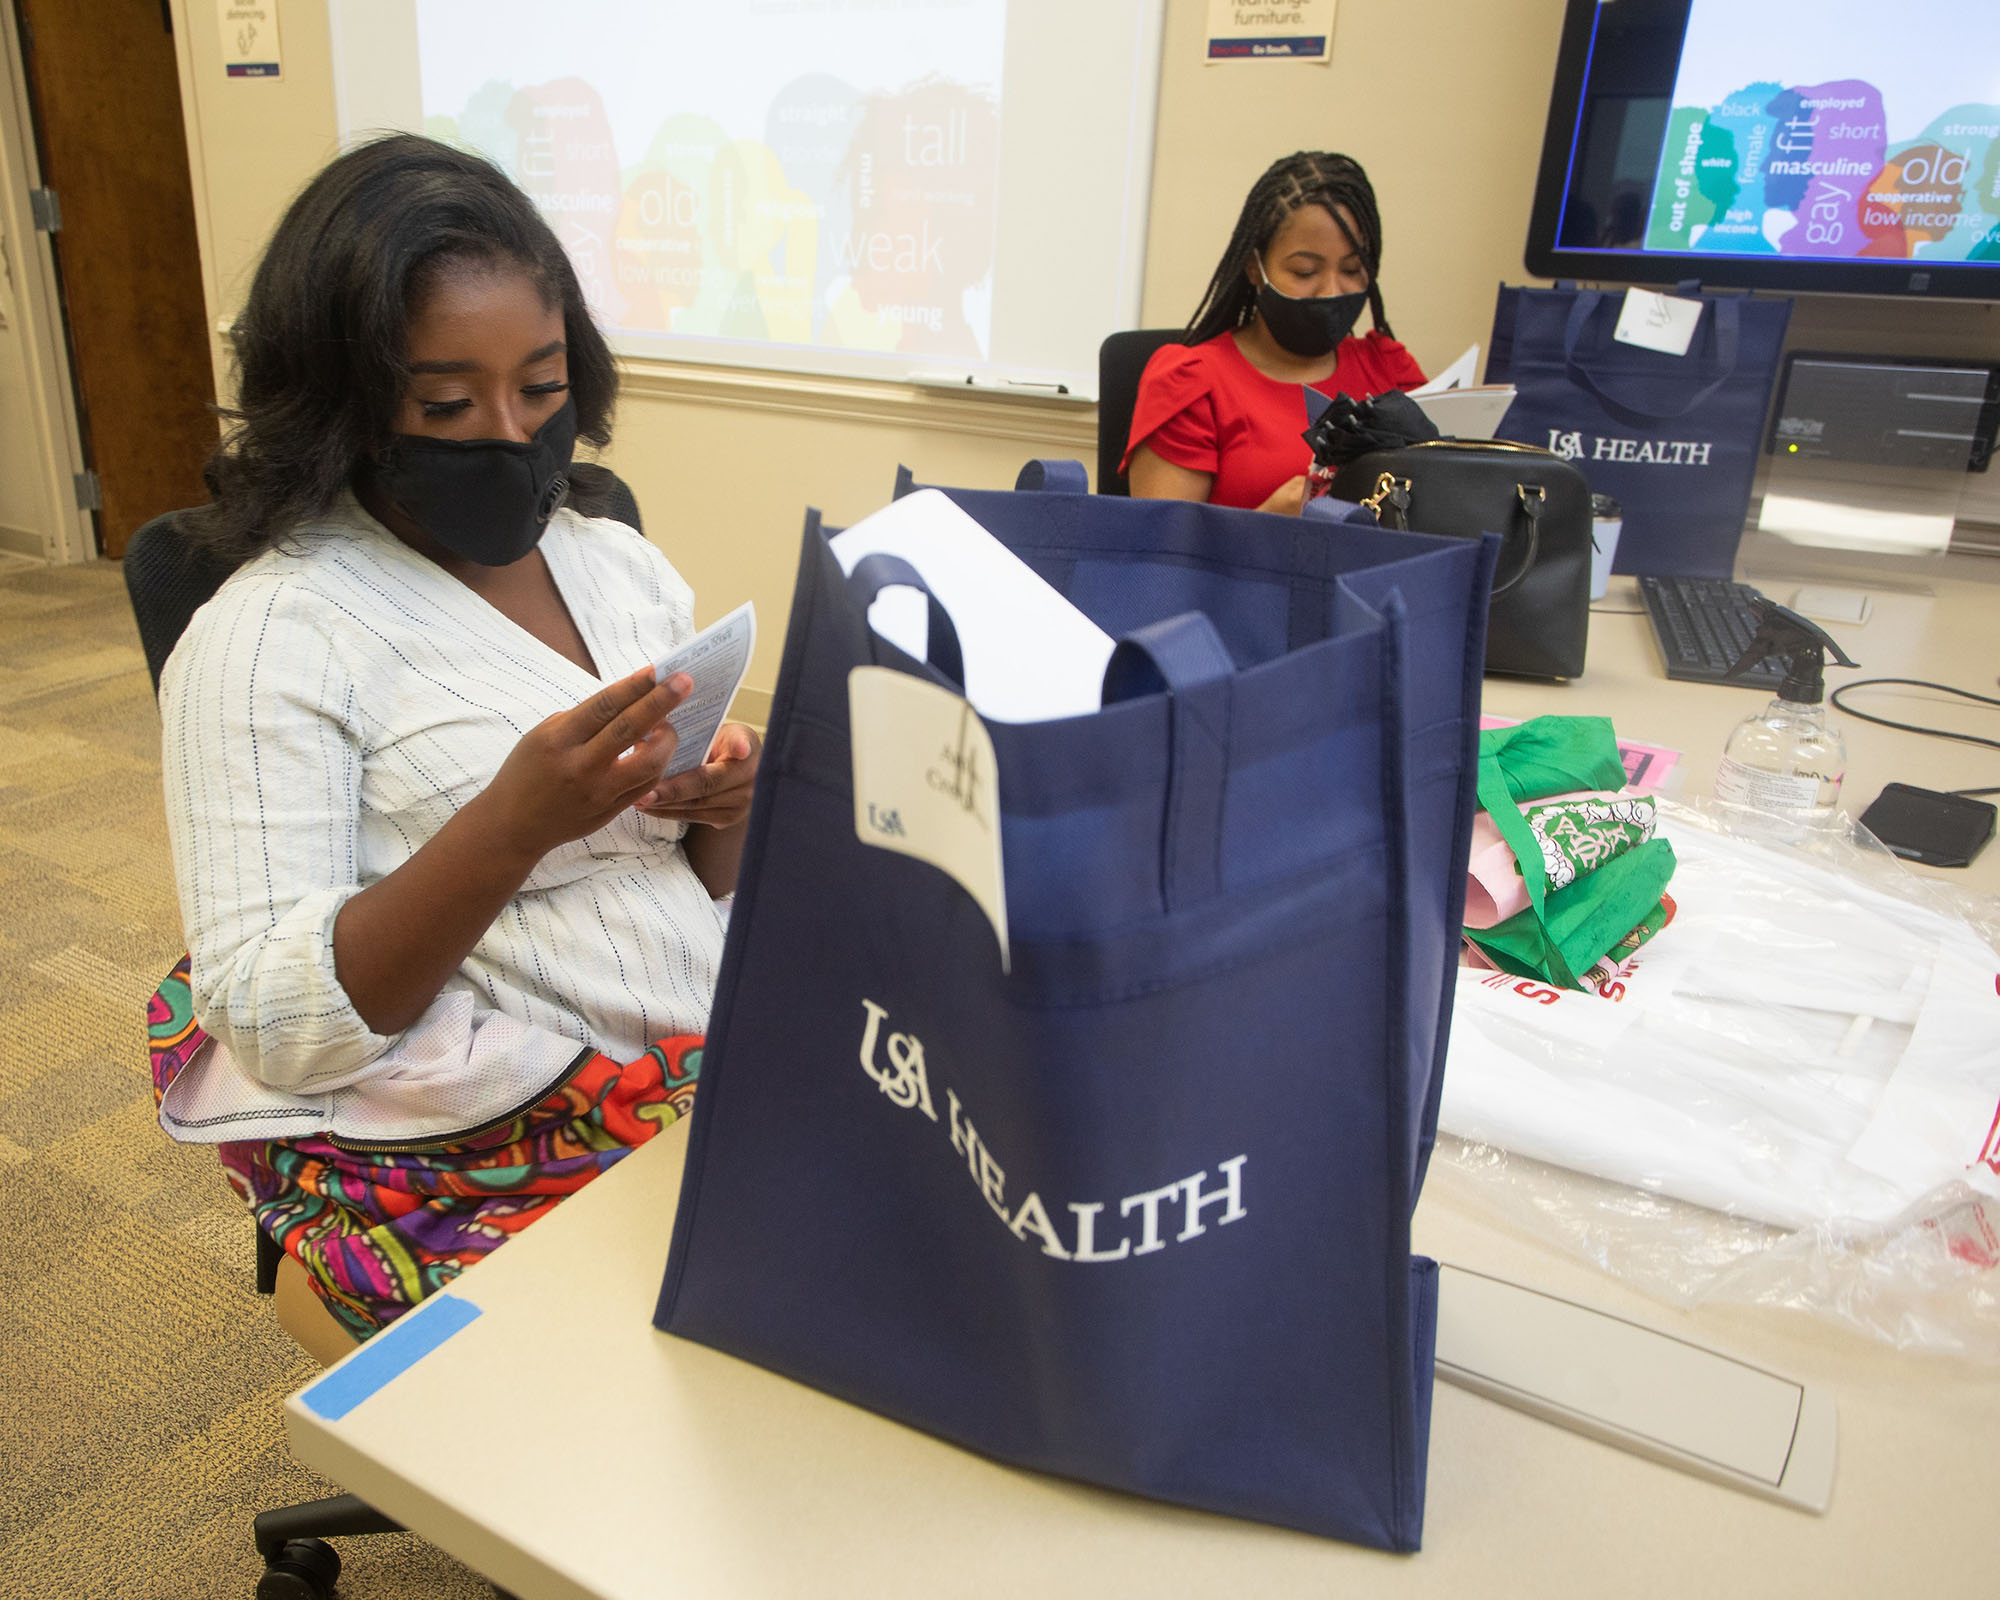 USA College of Medicine Class of 2024 medical students Amber Crenshaw (left) and Tiara Dean look through their USA Health gift bags during their M1 orientation.